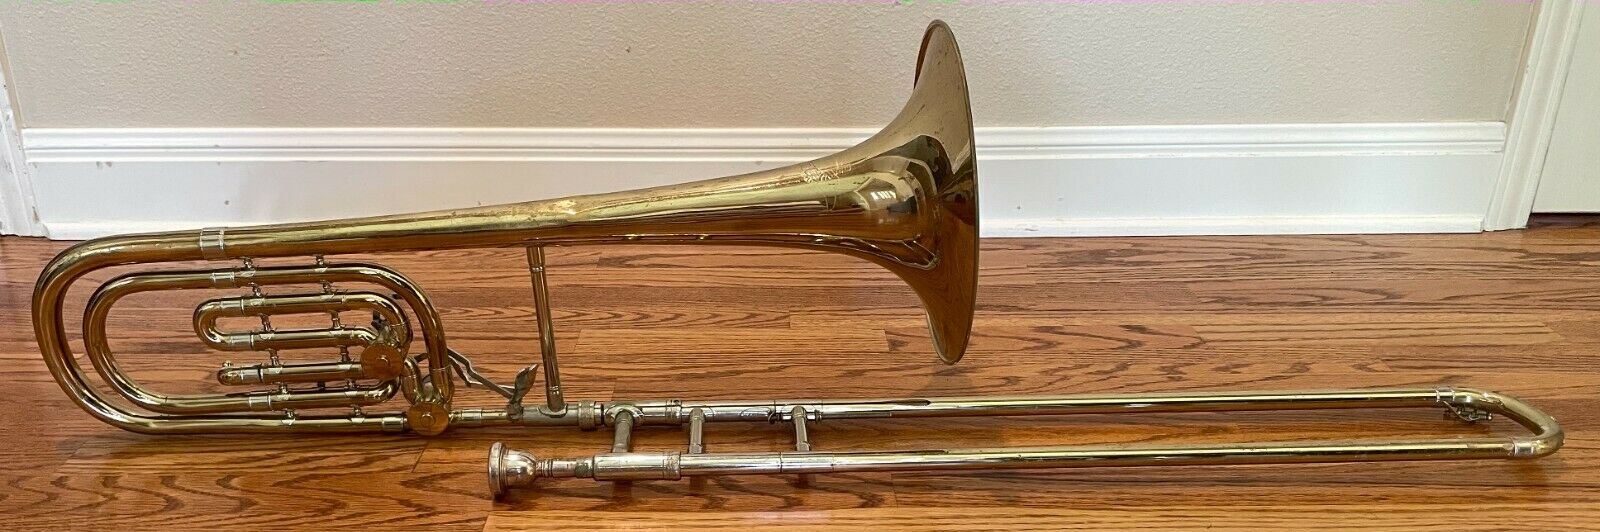 F.e. Olds + Son, The Olds Bass Trombone With Double Valve (1950s?) (fe Olds)